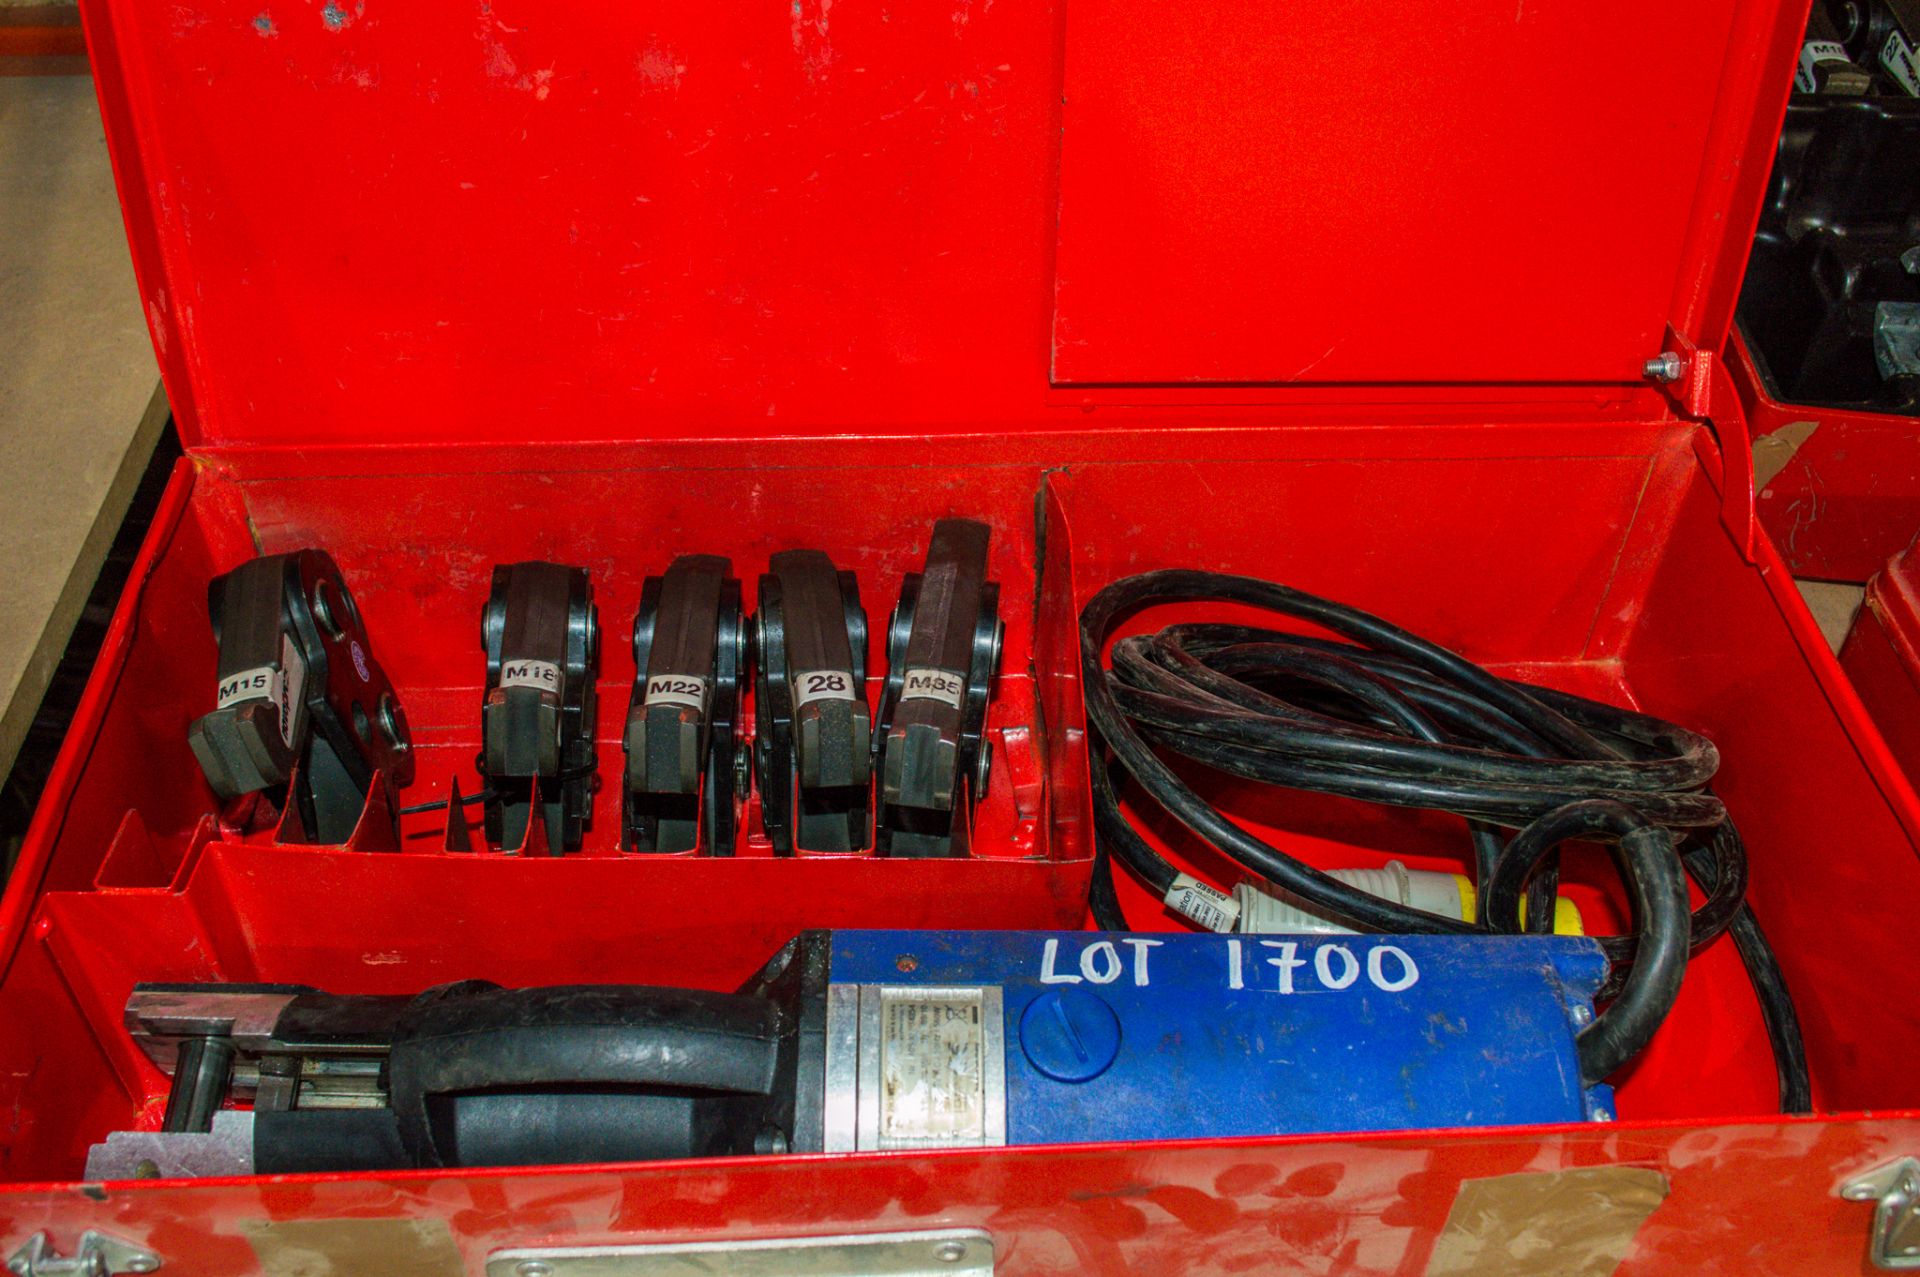 Mapress Gerberit 110v press fit crimping tool c/w 5 jaws and carry case PTH817